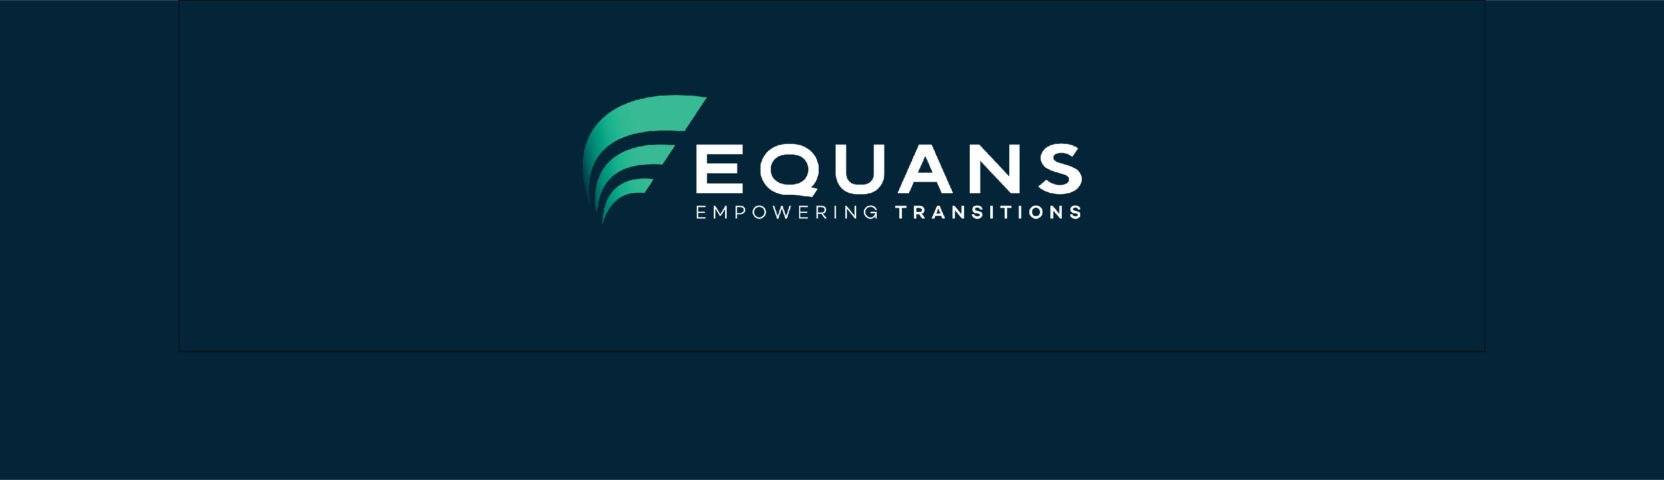 ENGIE Services Australia and New Zealand is becoming EQUANS | EQUANS ...